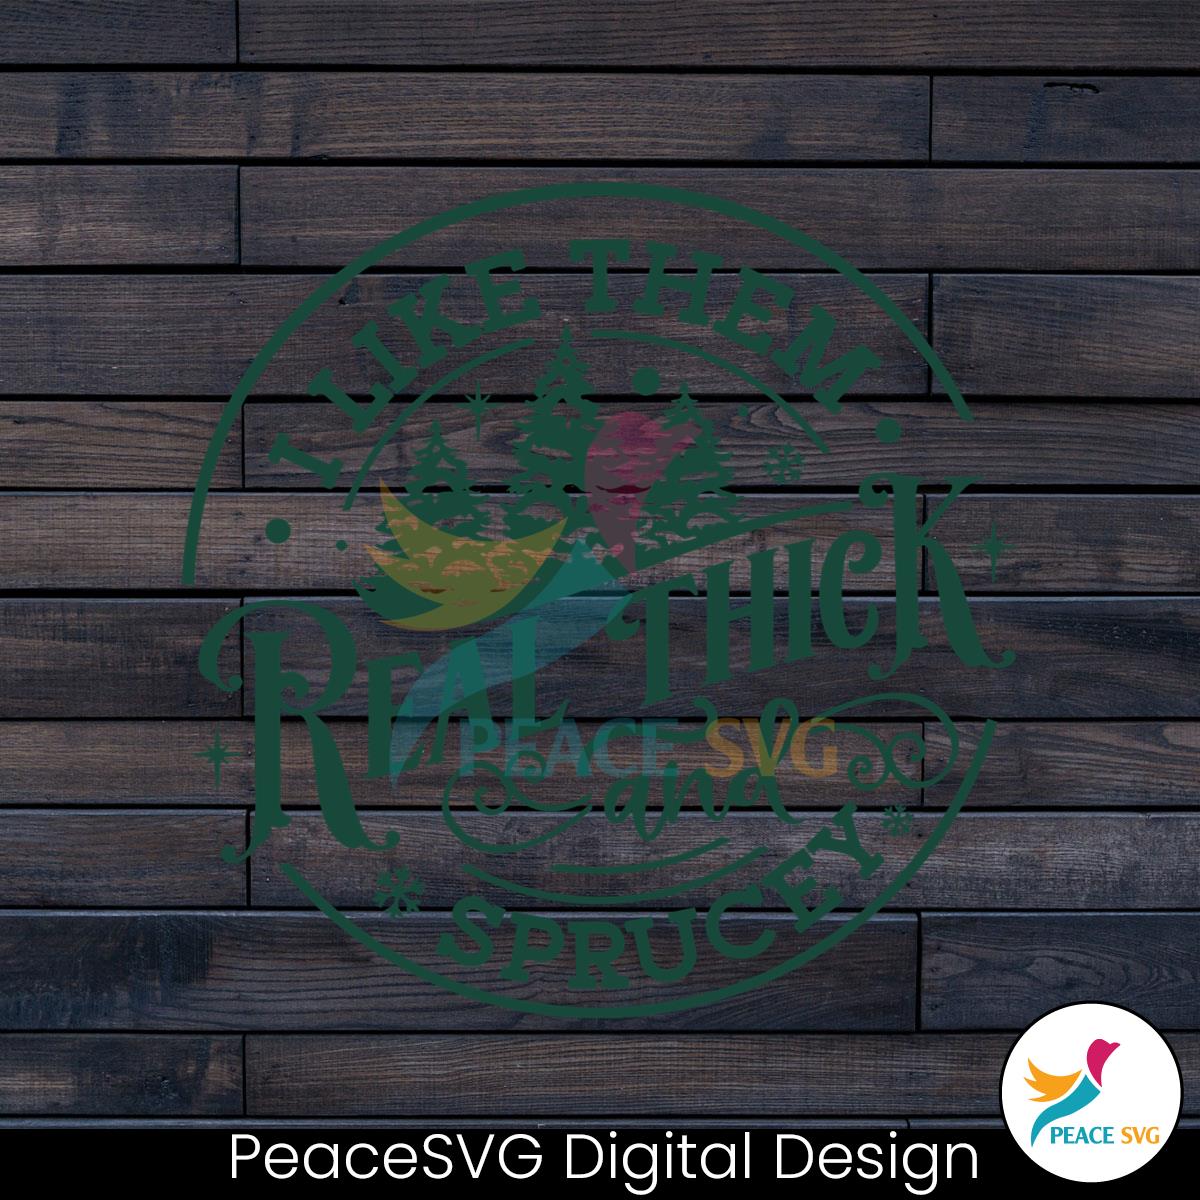 i-like-them-real-thick-and-sprucey-svg-digital-cricut-file